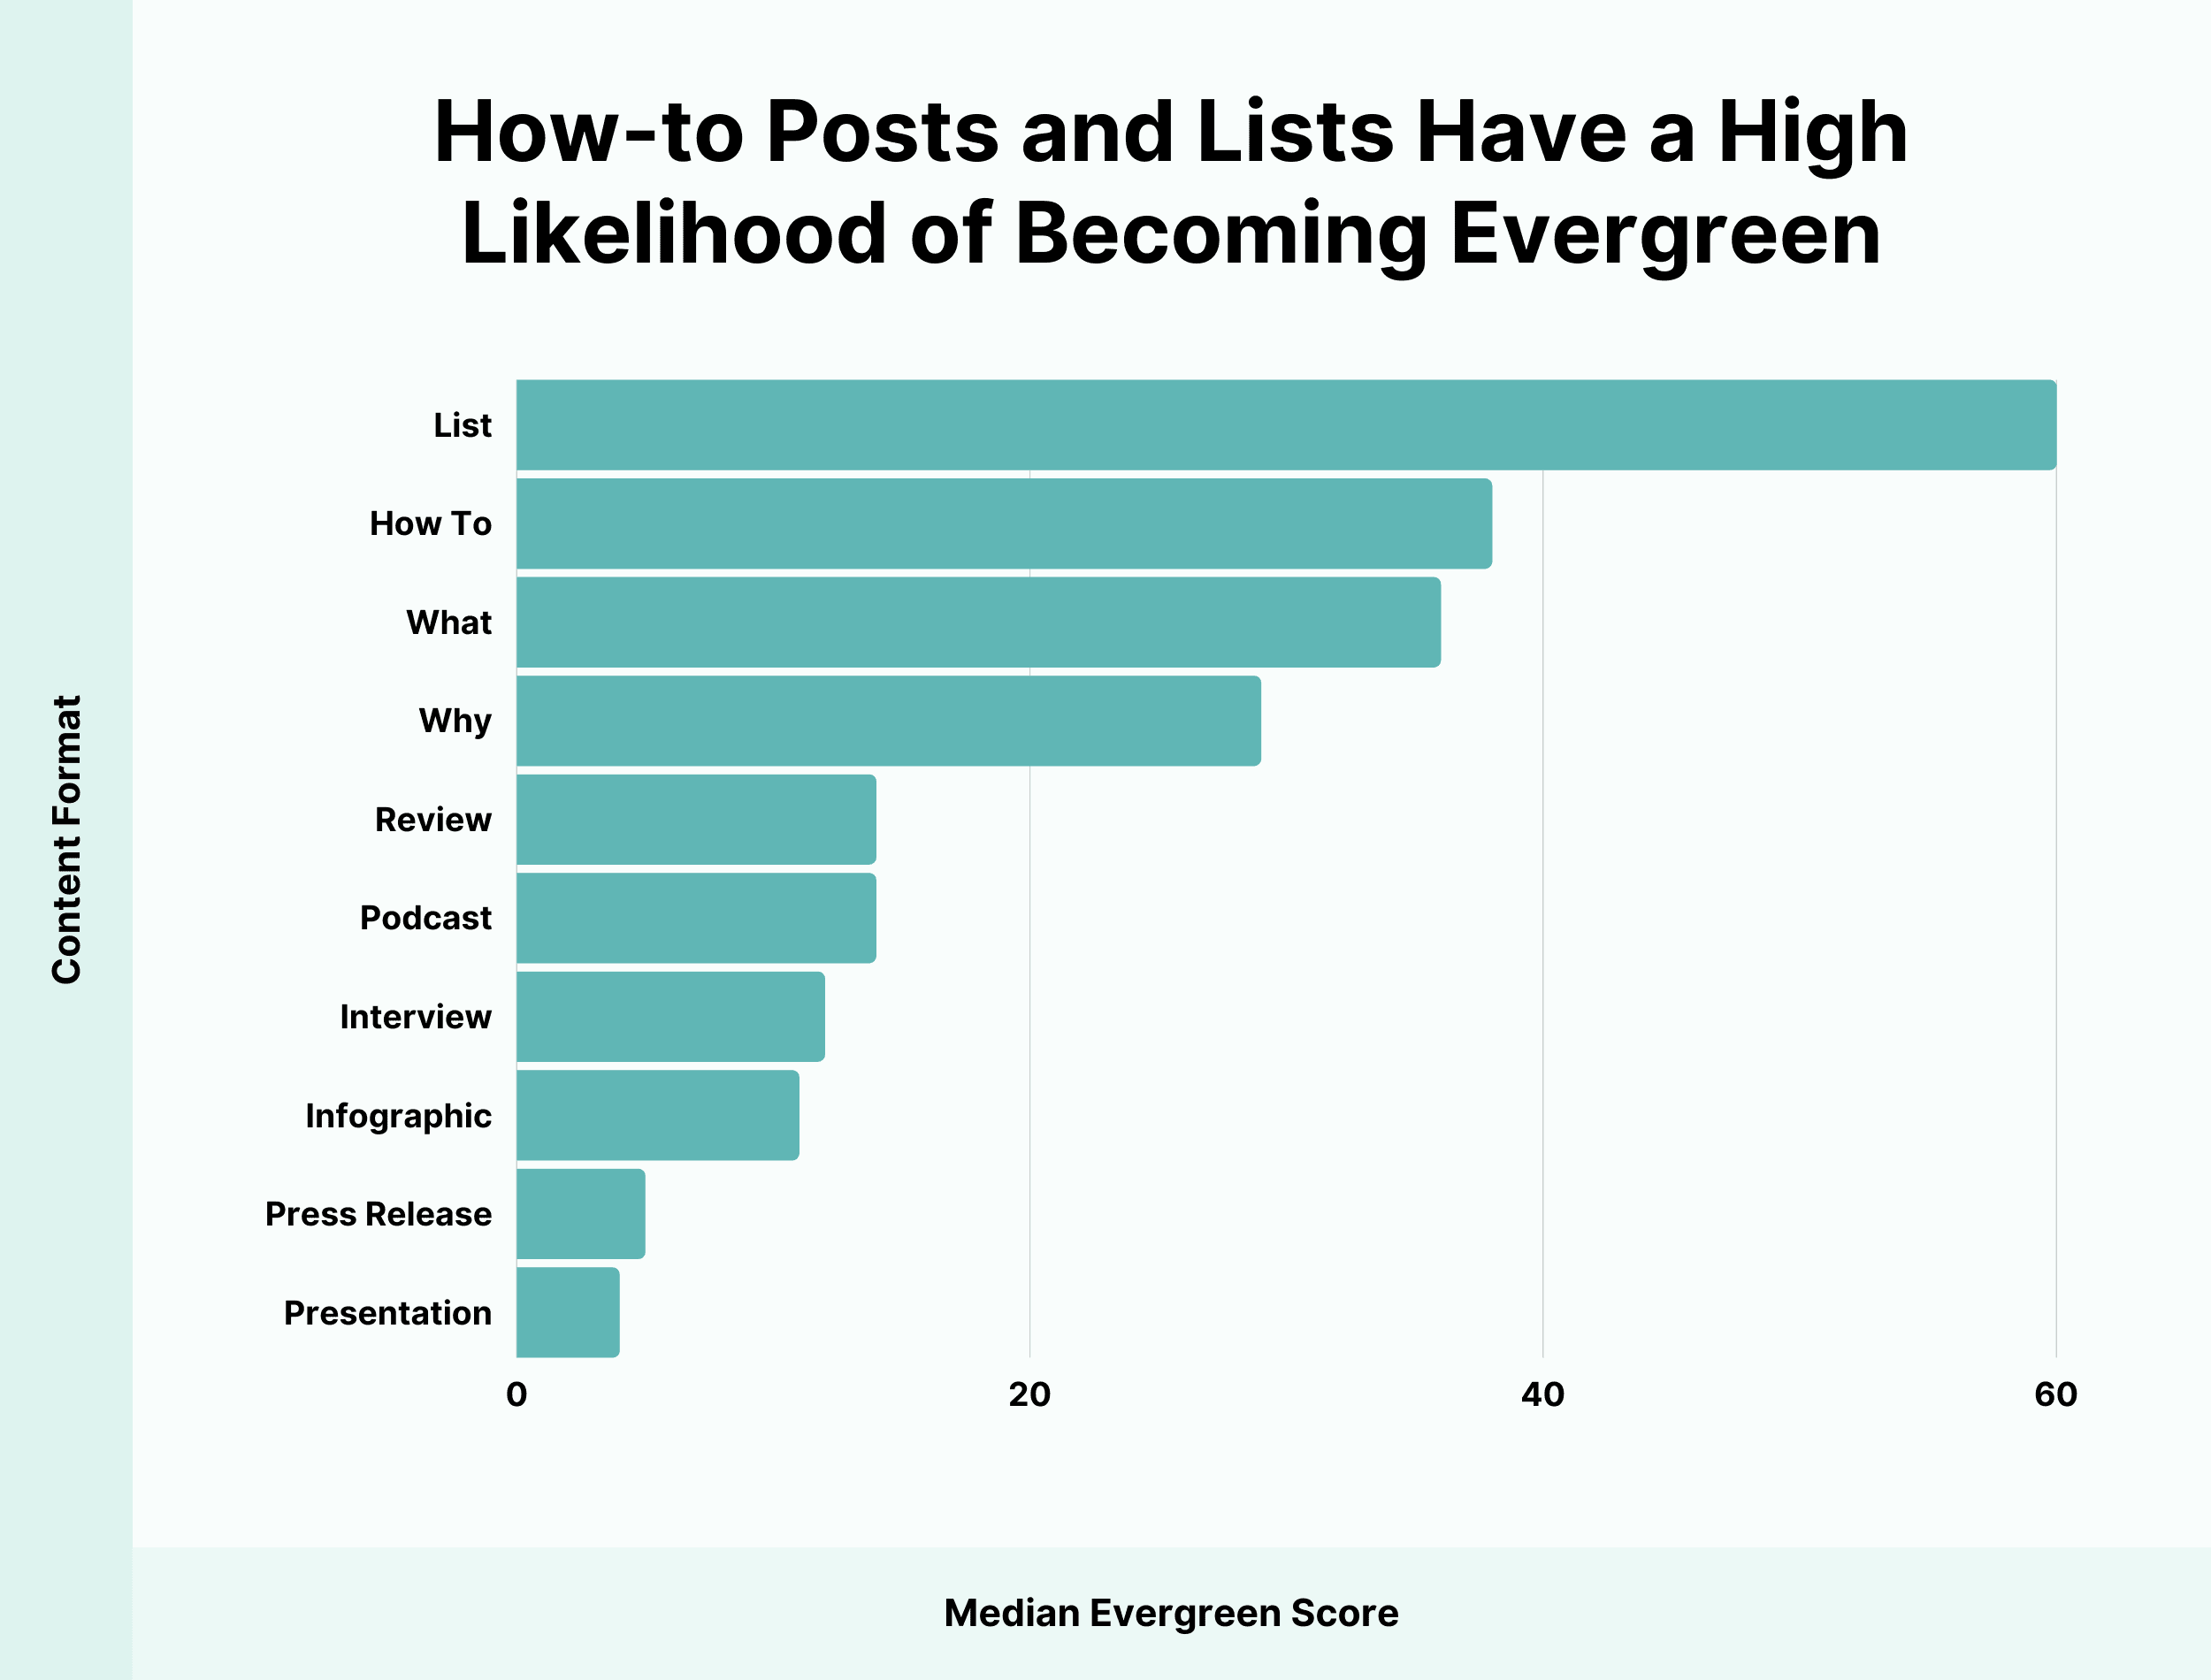 How-to posts and lists have a high likelihood of becoming evergreen